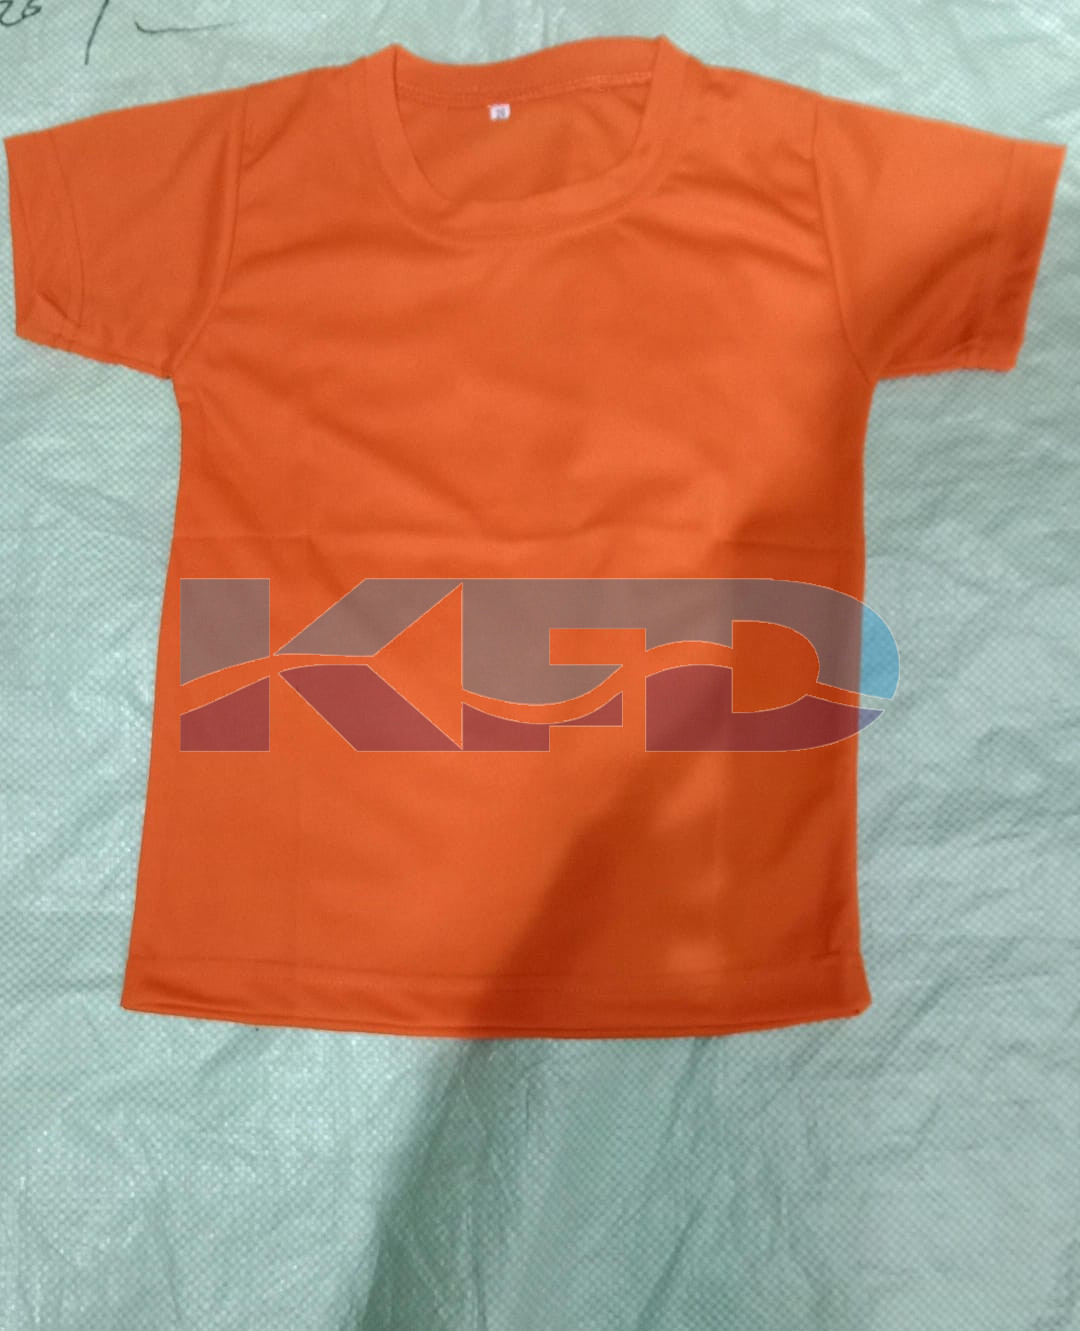 Half Sleeves T-Shirt Fancy Dress For Kids,Costume For Annual Function/Theme Party/Competition/Stage Shows Dress